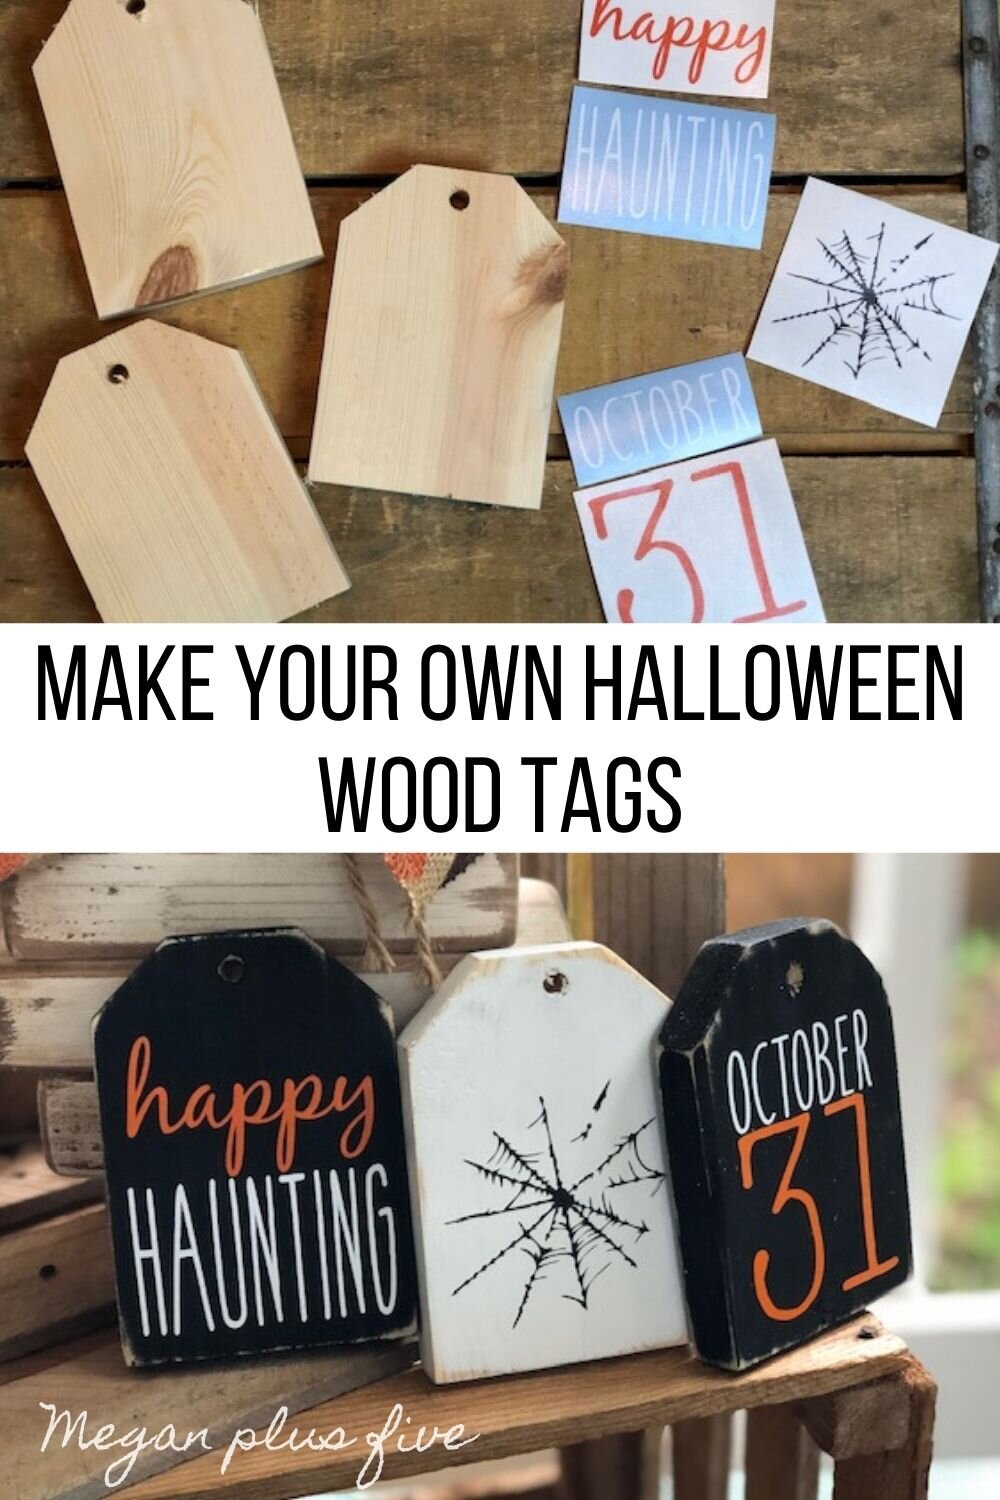 DIY Halloween wood tags, how to make your own rustic mini wood tags for your tiered tray decor. DIY craft kit for adults